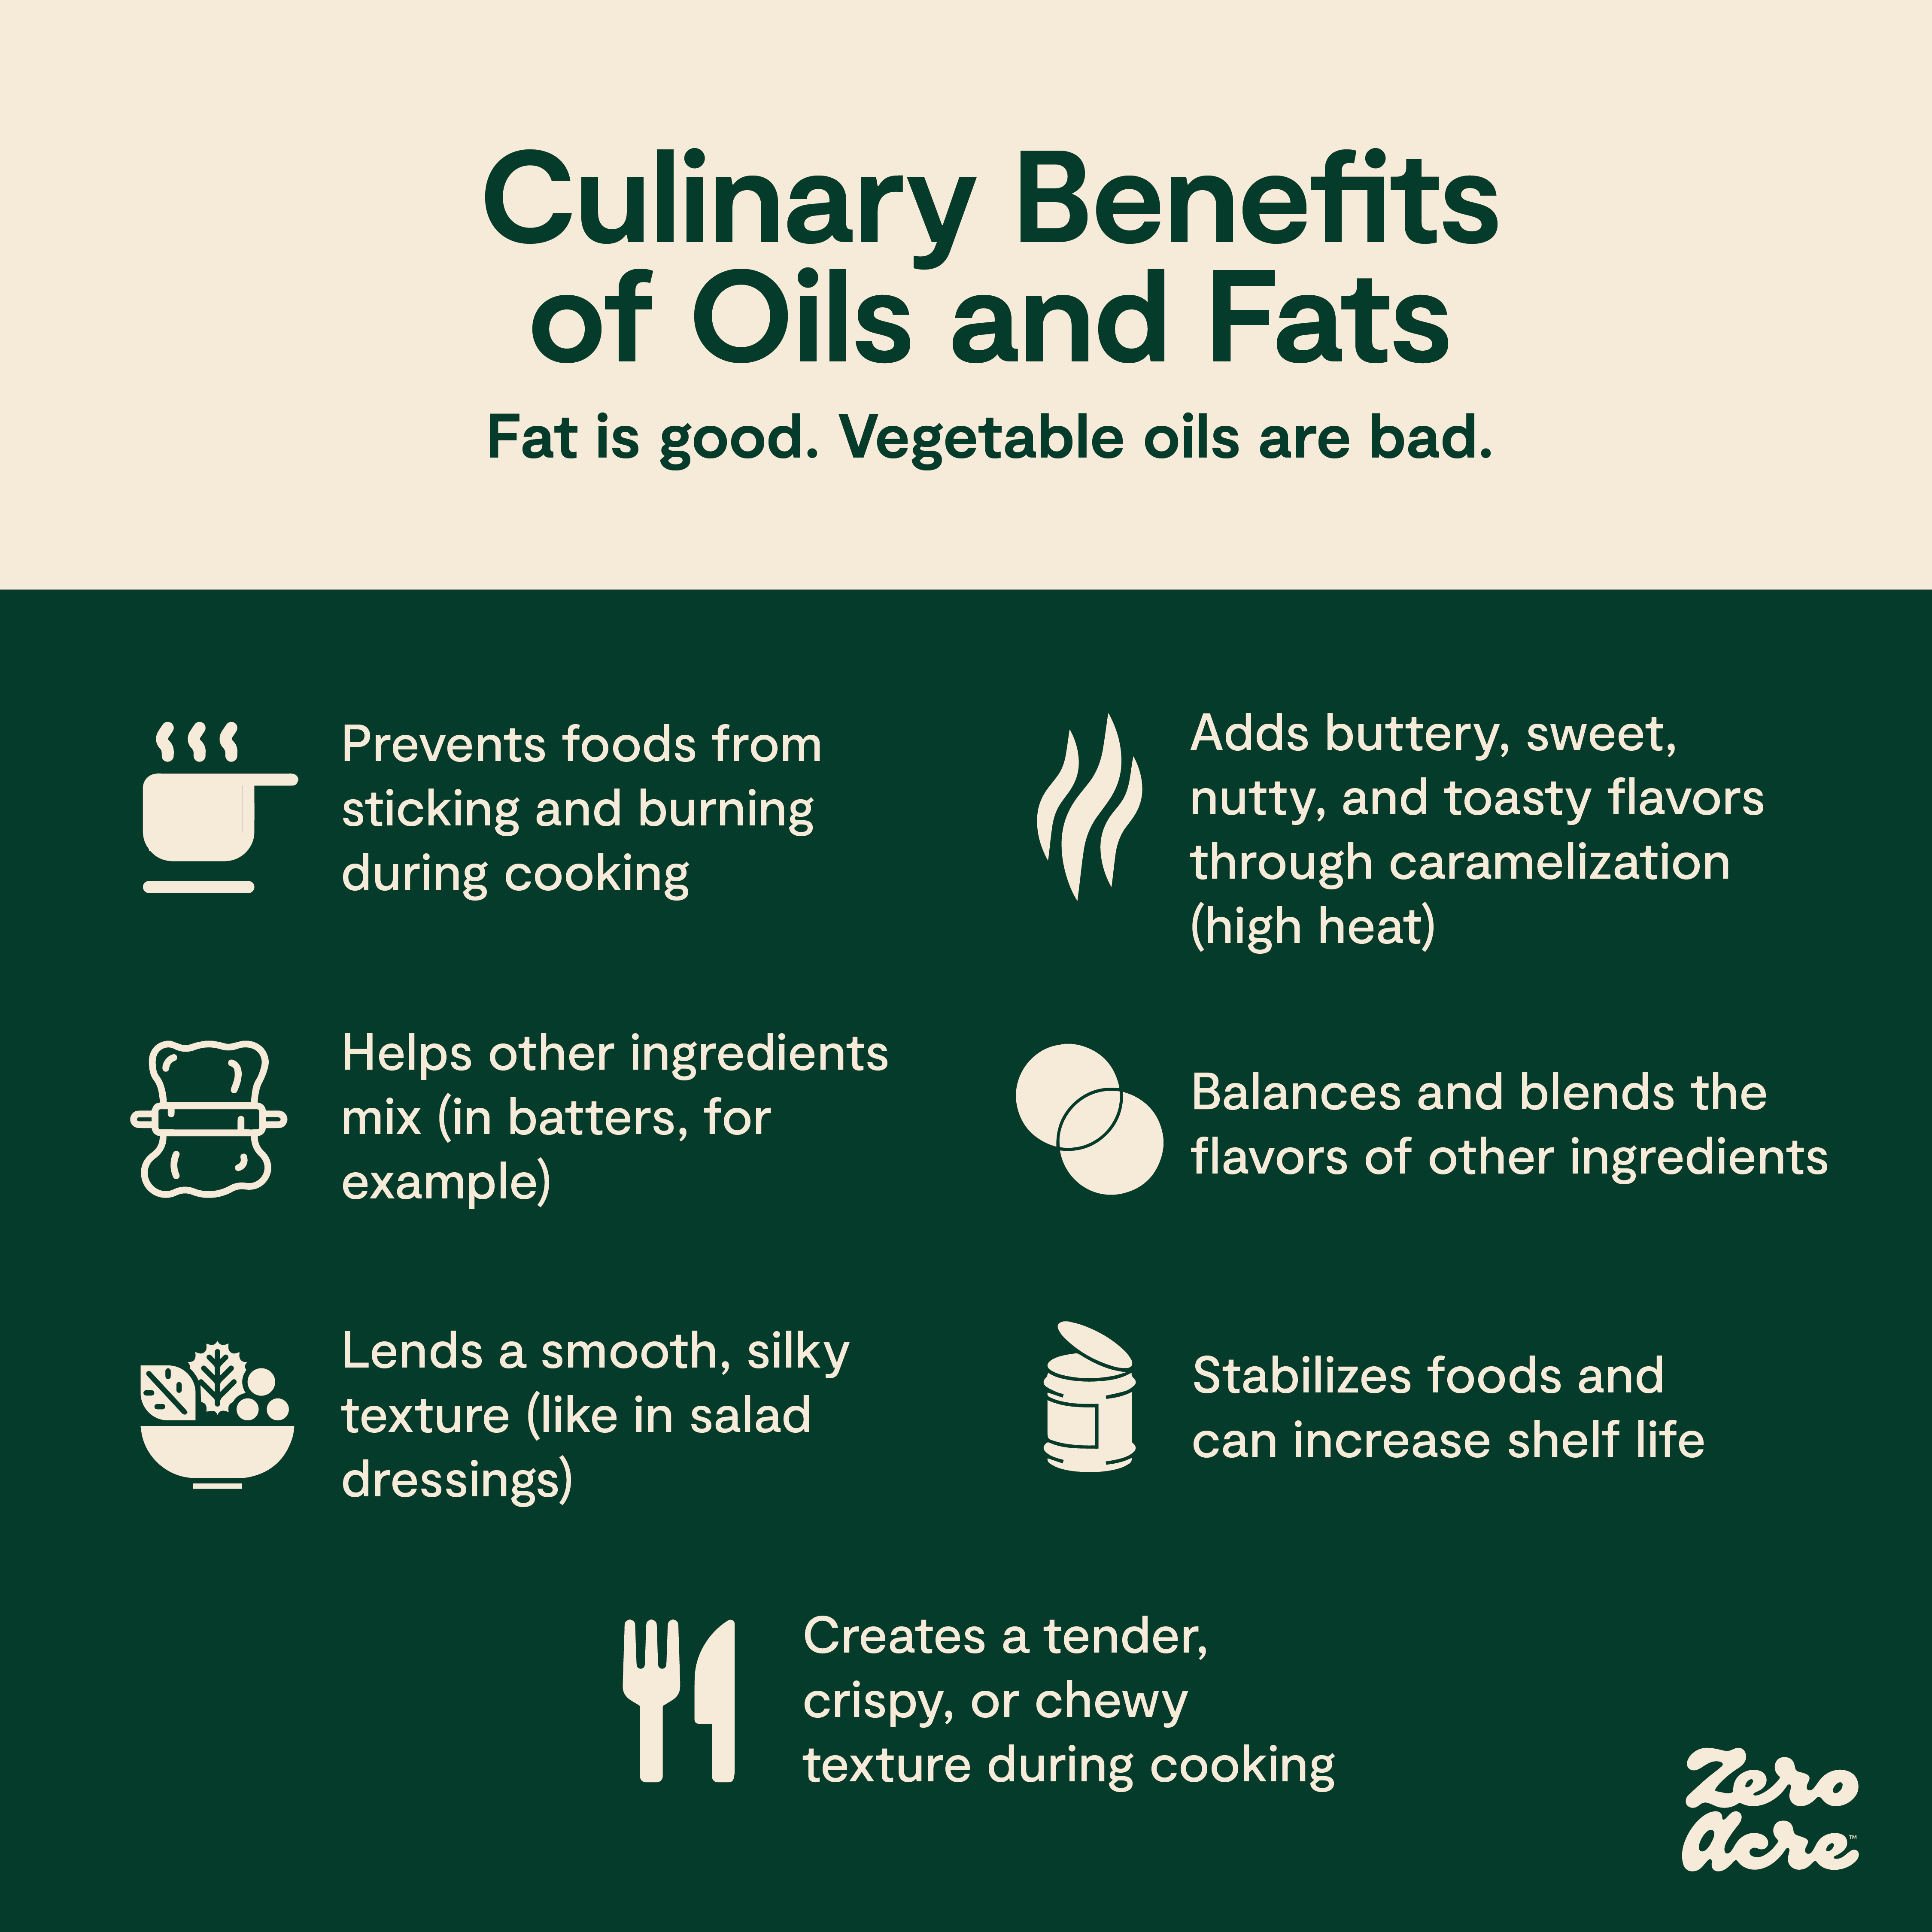 https://images.ctfassets.net/stnv4edzz8v3/4U9r6wsARQEKJGfxiwotC4/9e45eb5dc96f1158524bec99f265807f/Culinary_benefits_of_oils_and_fats.png